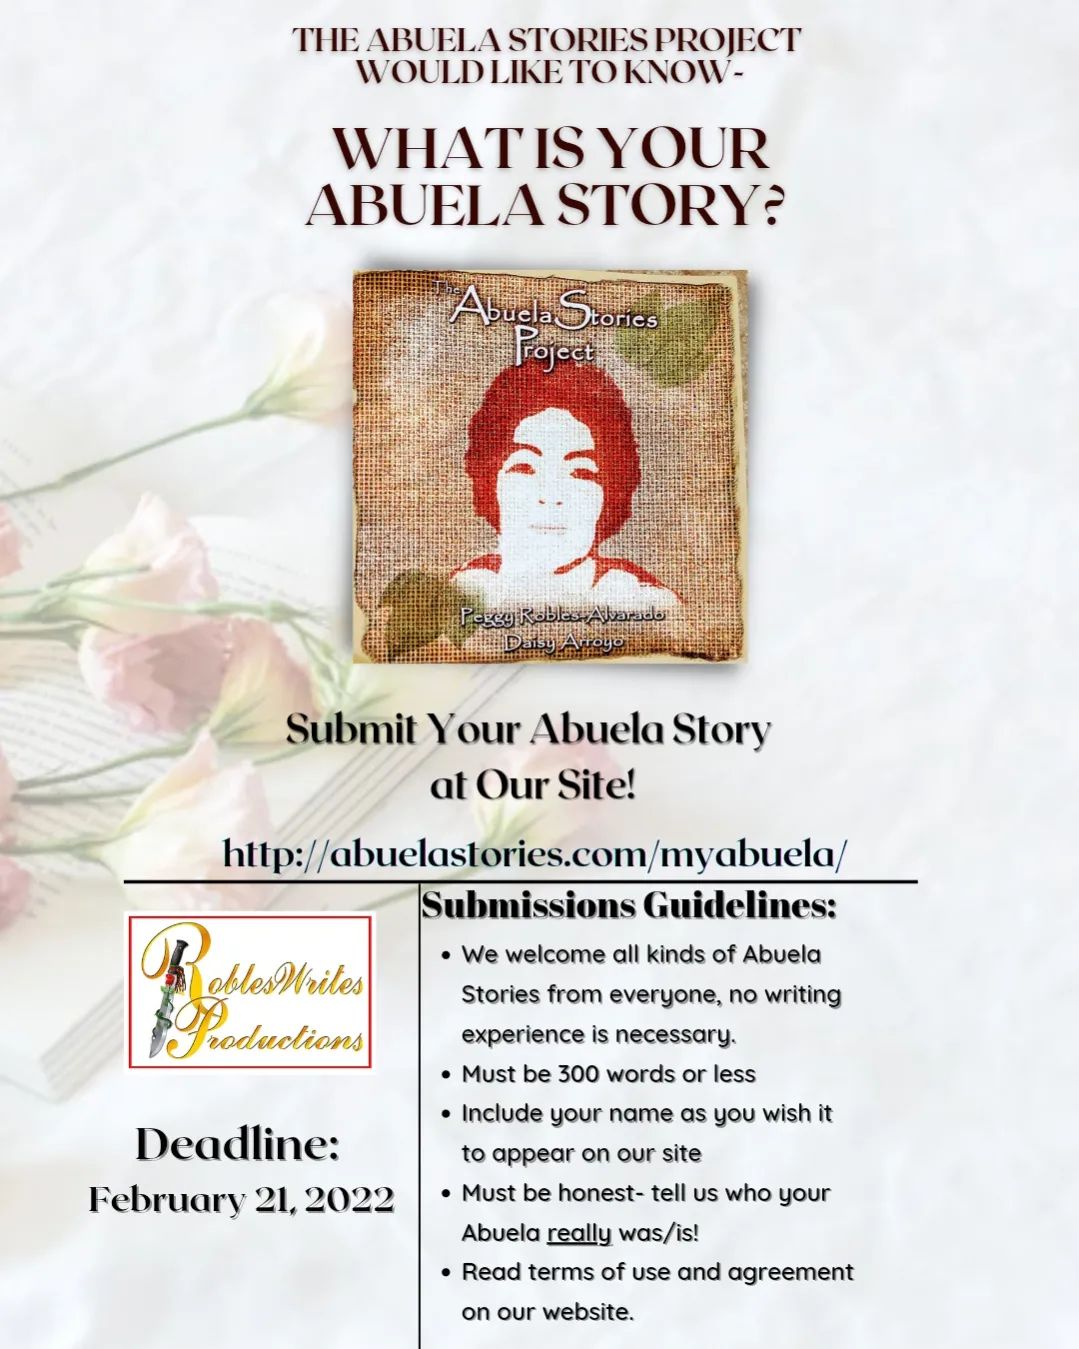 Abuela stories submission call.jpg, Feb 2022